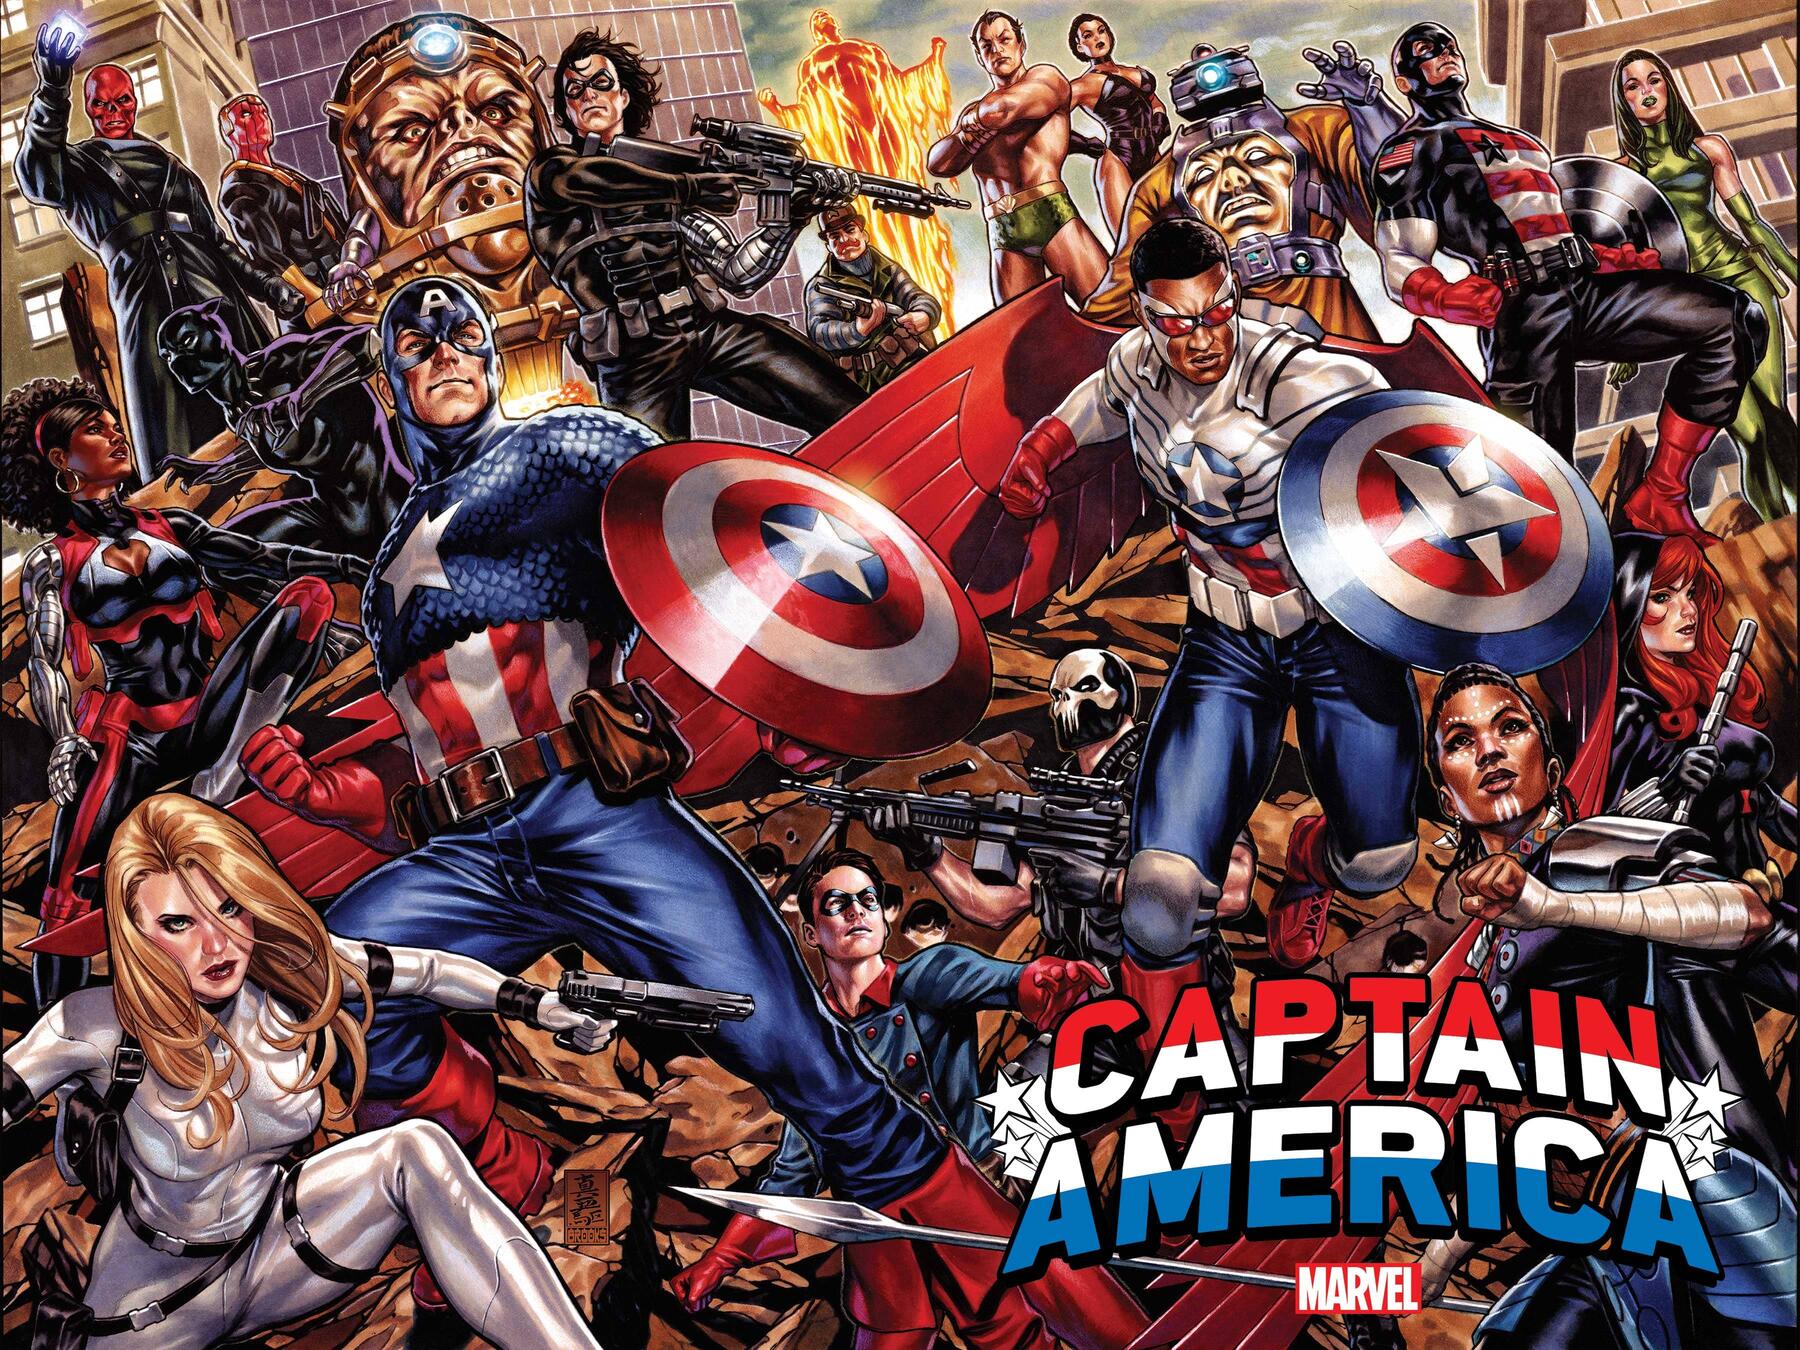 Marvel launching two new Captain America series starting in April 2022